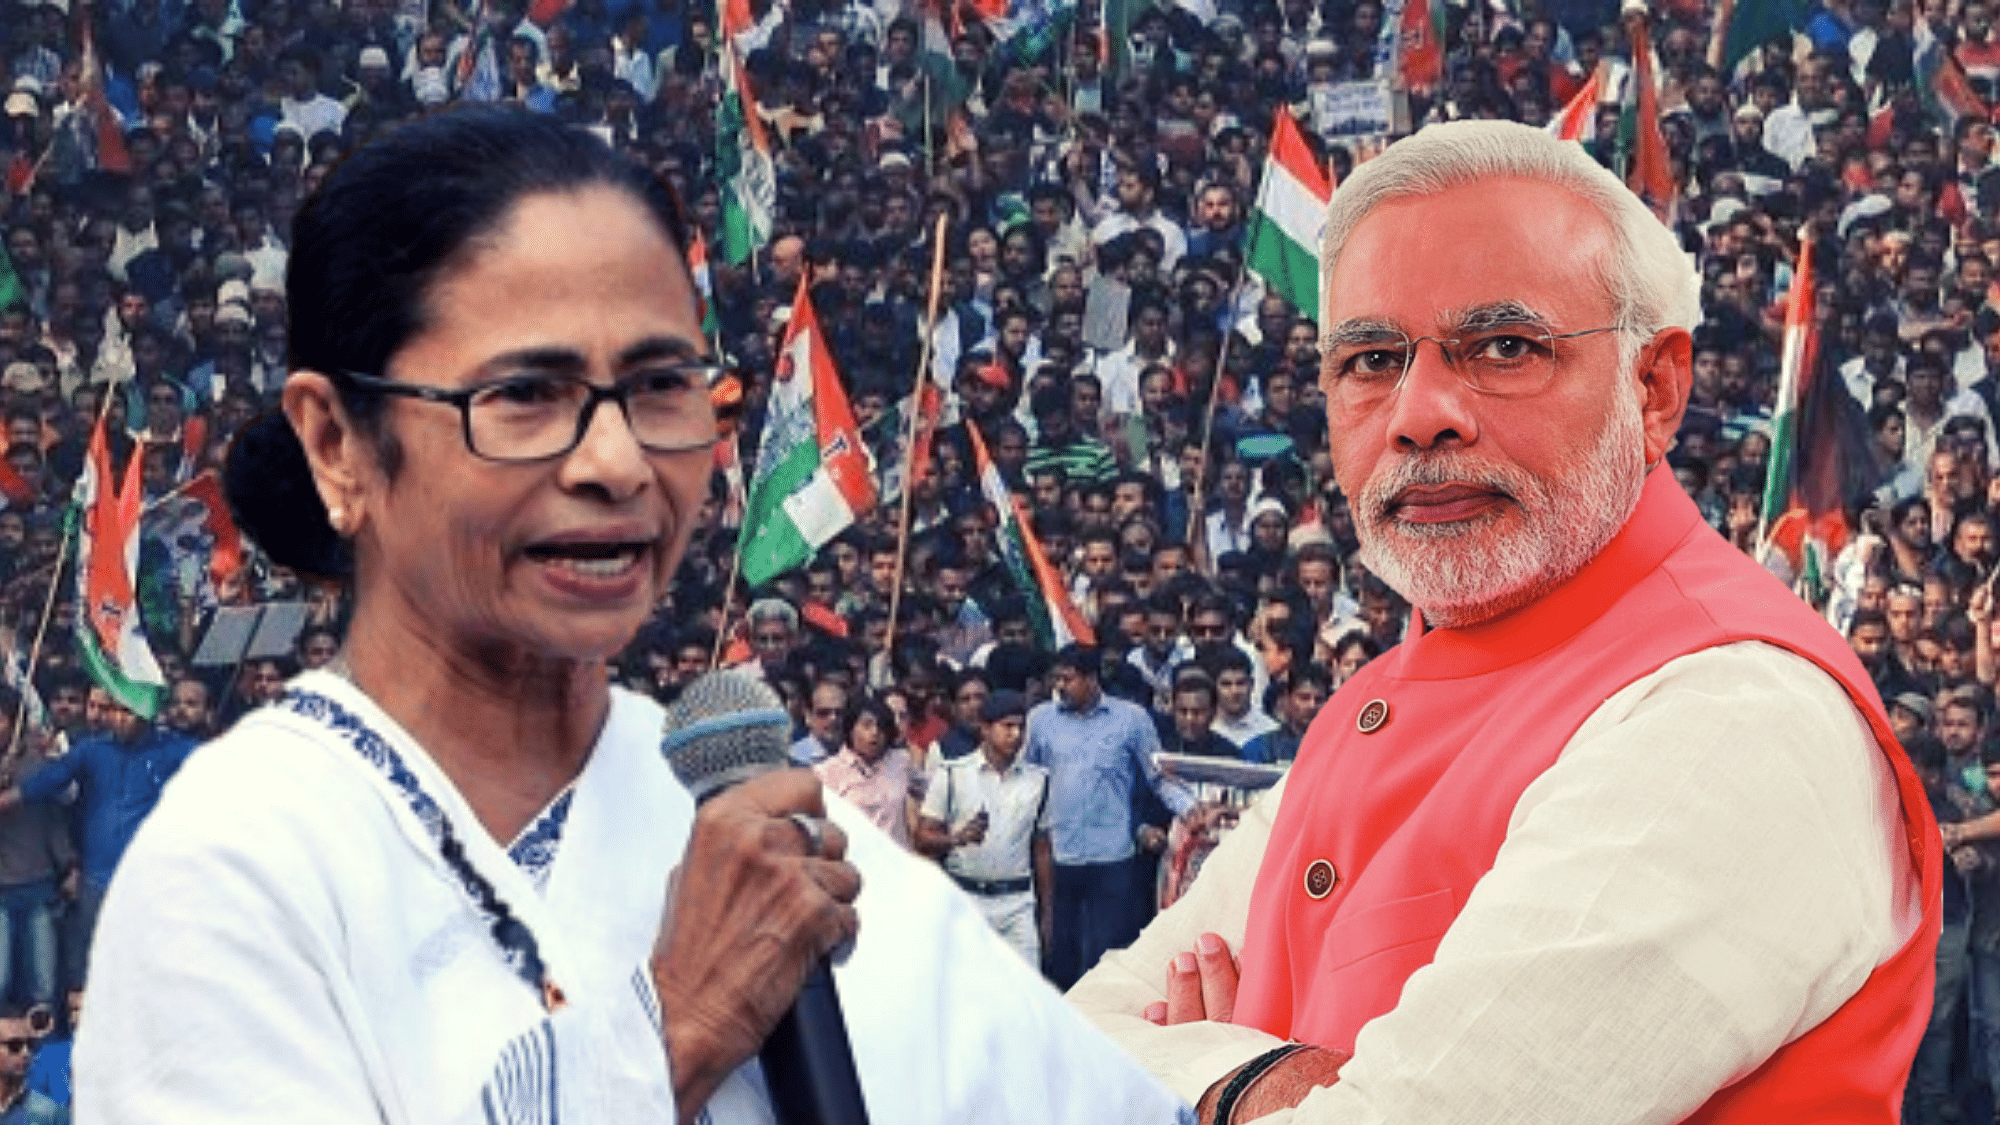 How is Mamata Banerjee standing up to the BJP’s CAA-NRC challenge and how is this changing the political dynamic in West Bengal, which goes to polls in 2021?